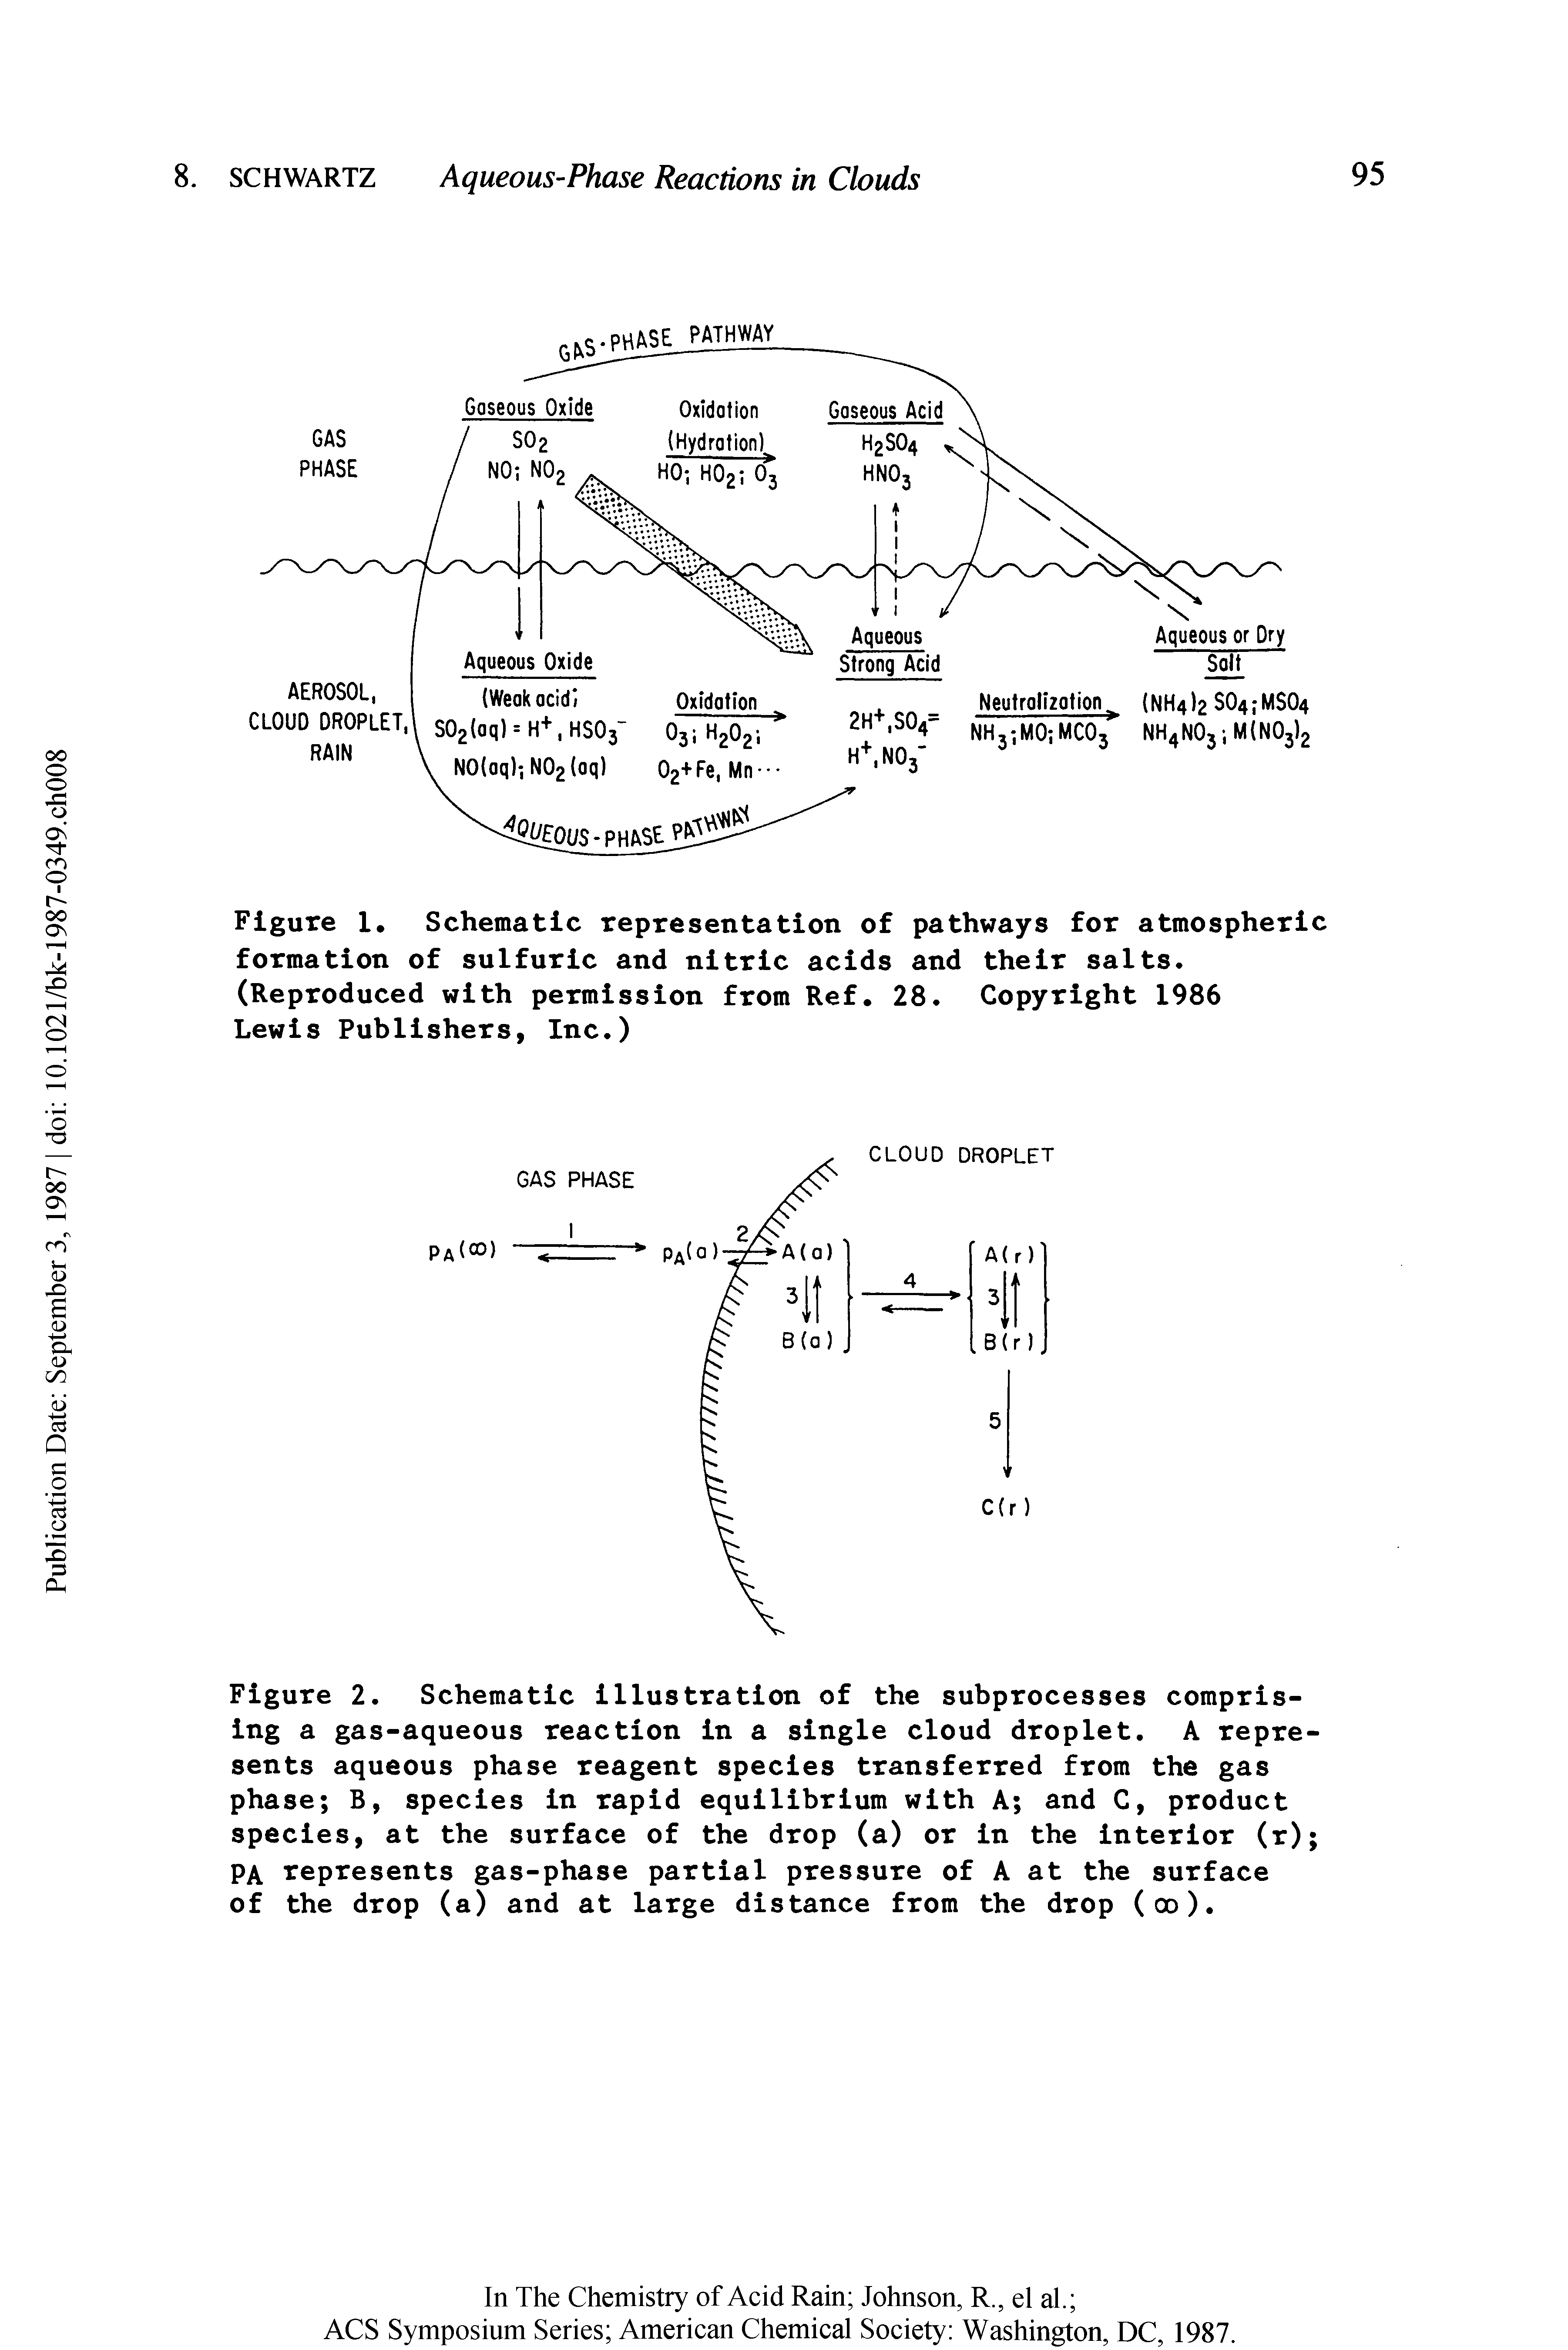 Figure 1. Schematic representation of pathways for atmospheric formation of sulfuric and nitric acids and their salts. (Reproduced with permission from Ref. 28. Copyright 1986 Lewis Publishers, Inc.)...